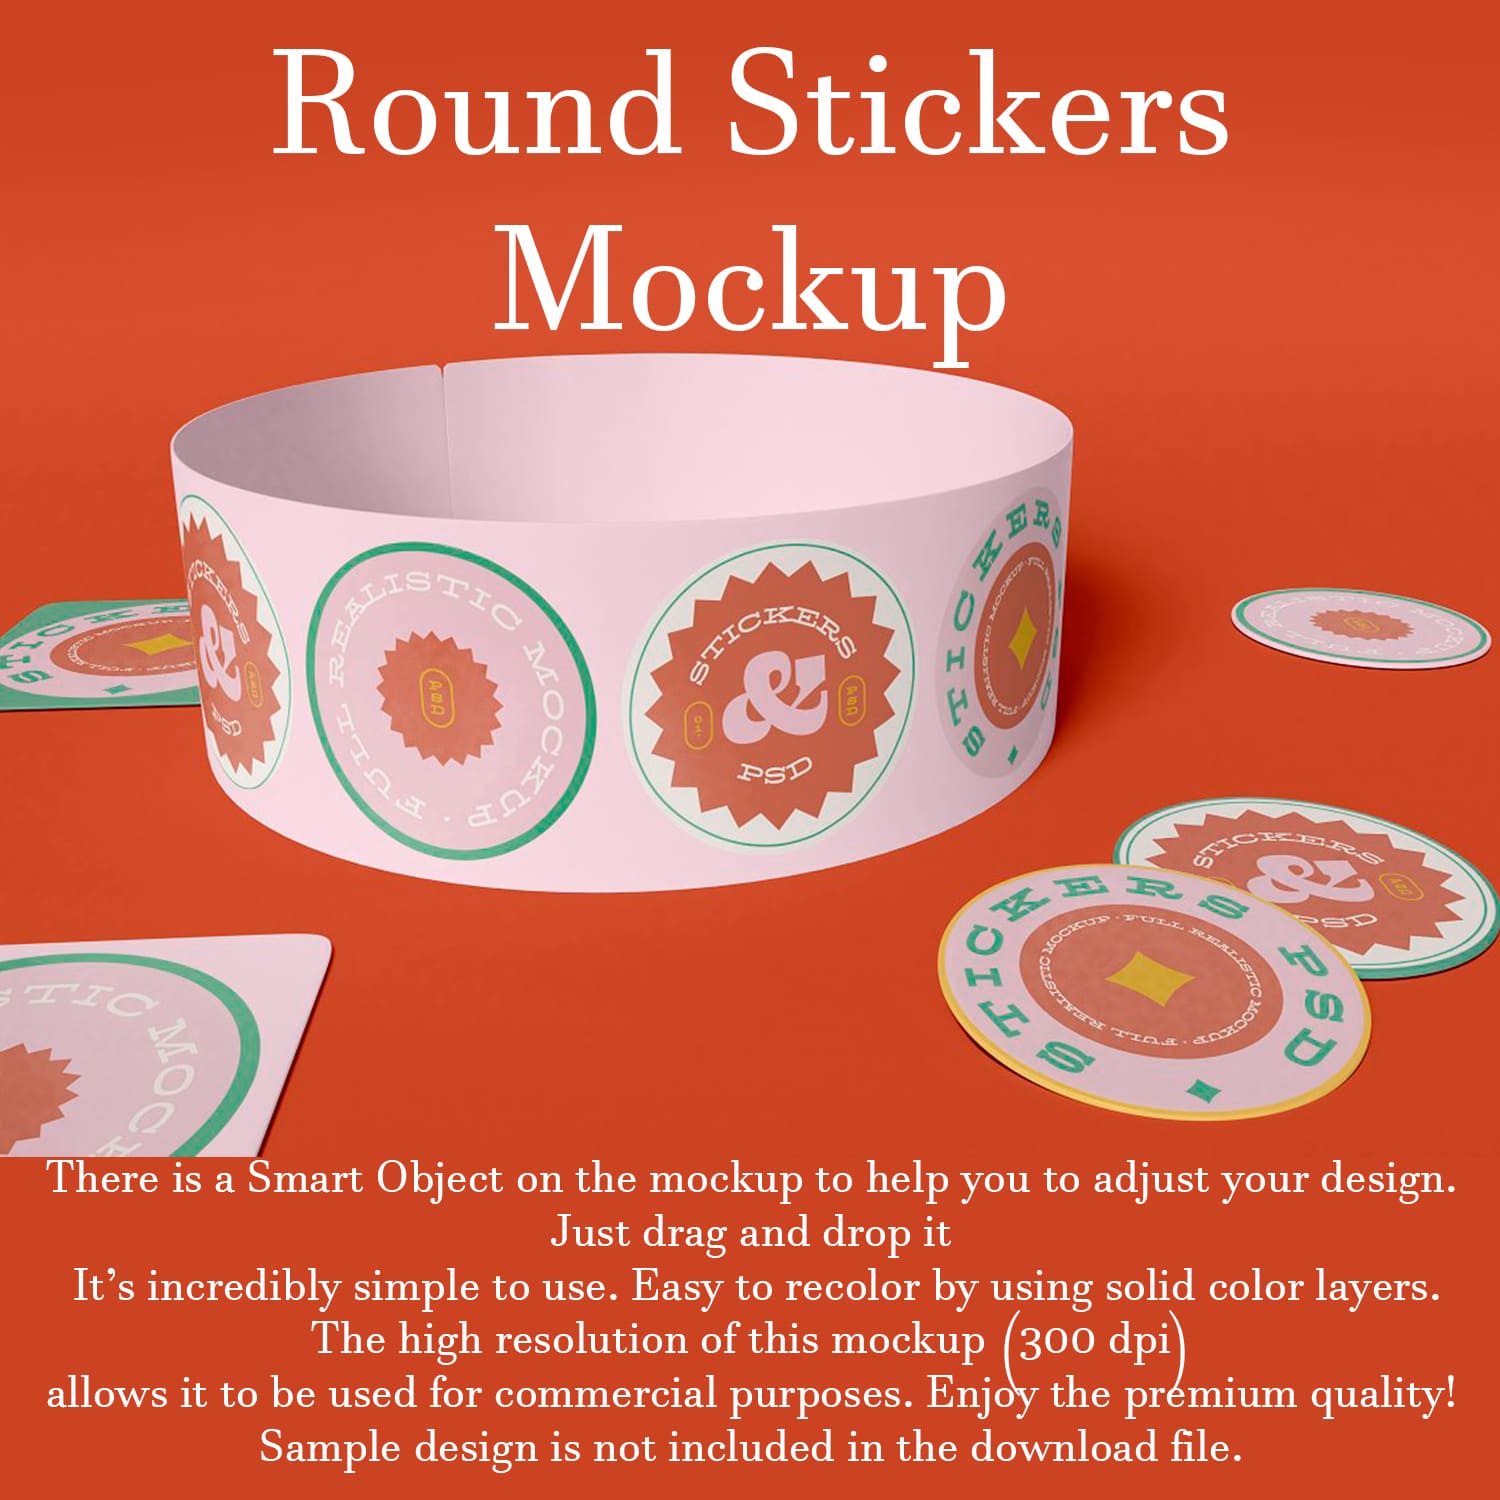 Image of adorable round shaped stickers with pictures.